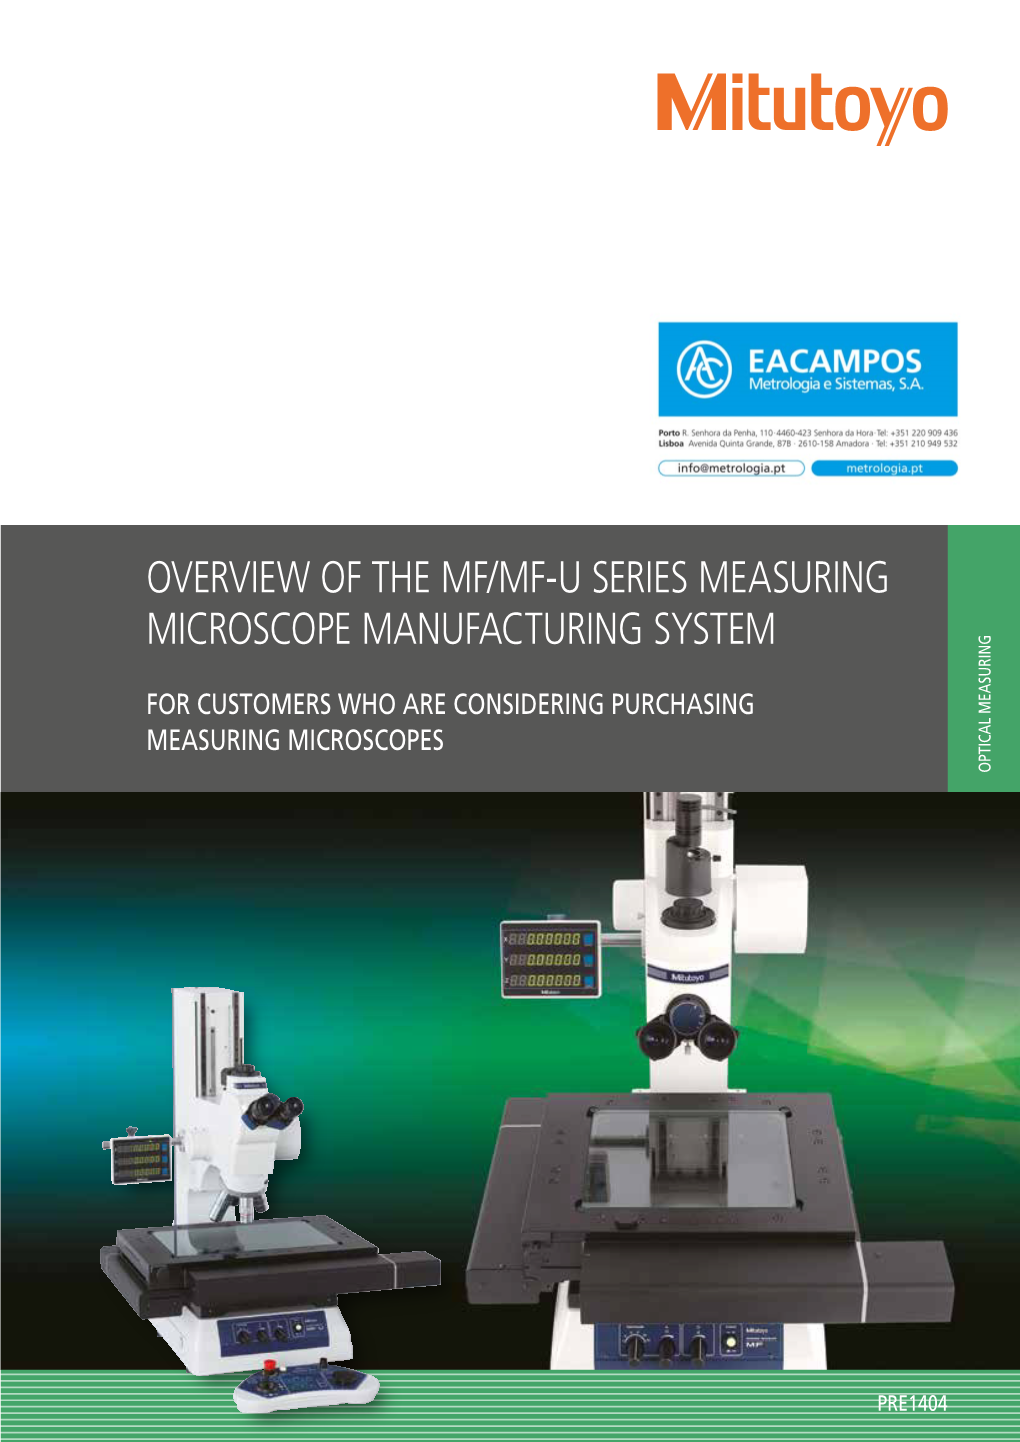 Overview of the Mf/Mf-U Series Measuring Microscope Manufacturing System